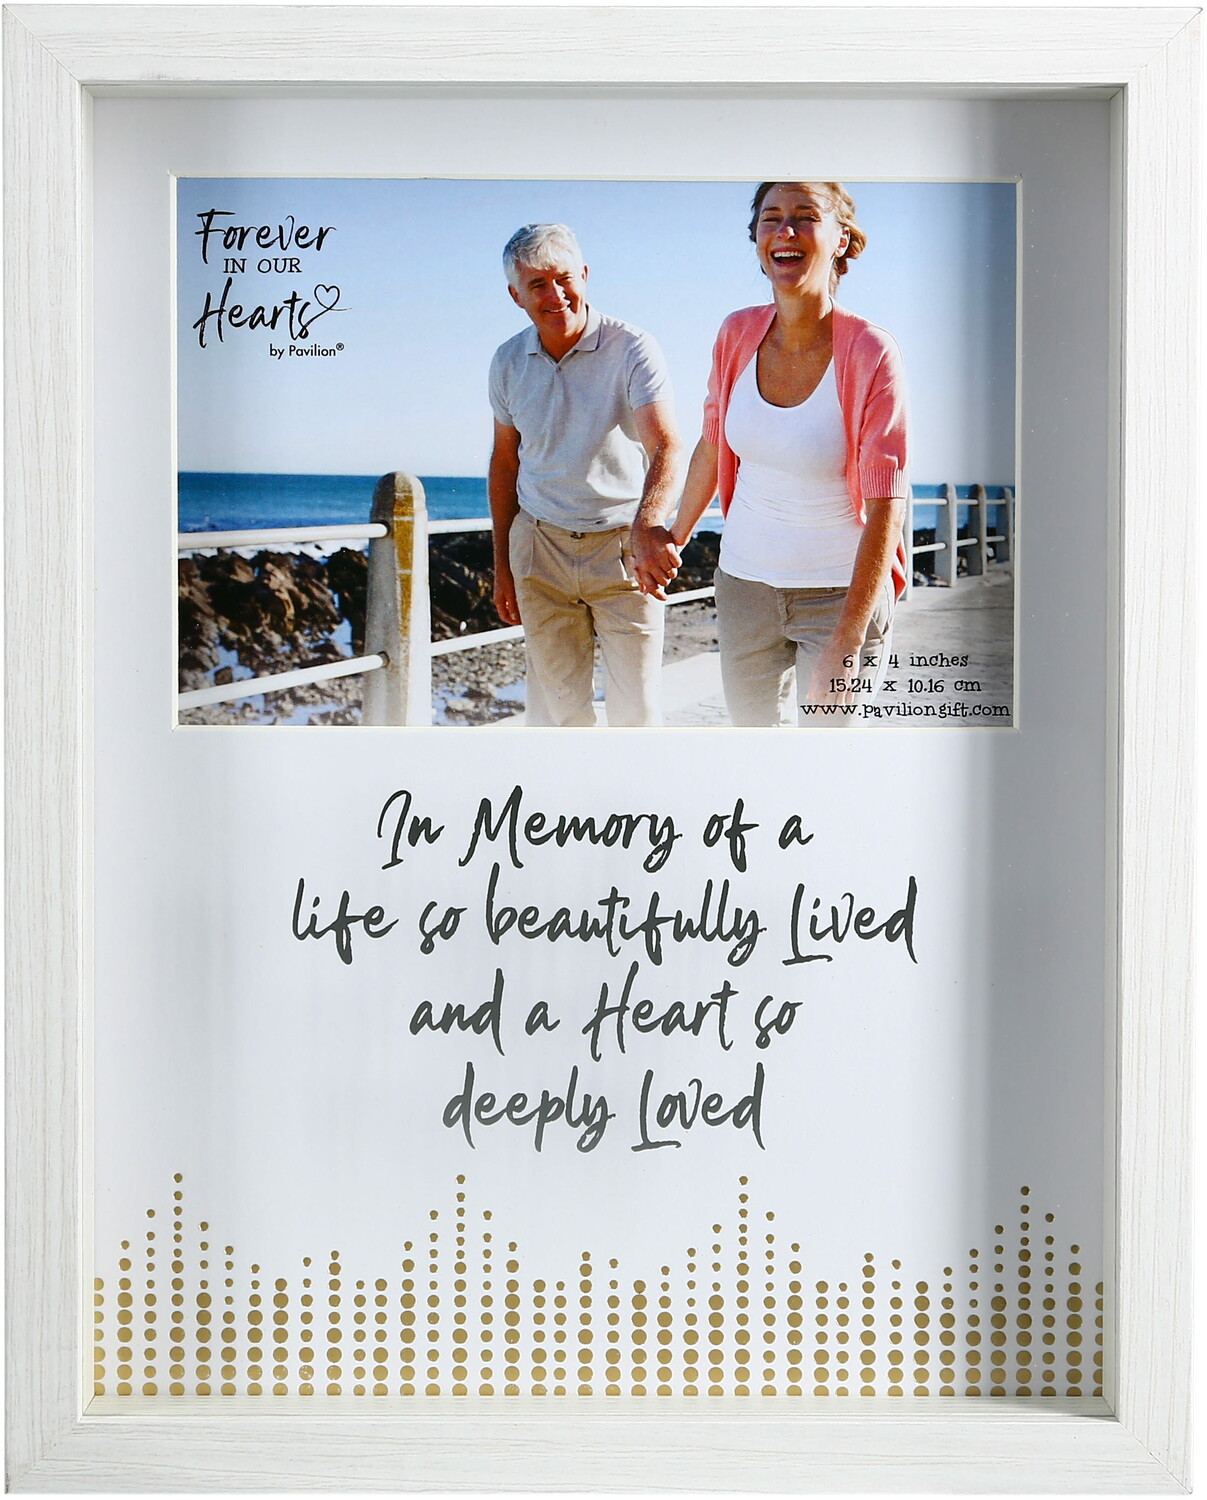 Memory by Forever in our Hearts - Memory - 7.5" x 9.5" Shadow Box Frame
(Holds 6" x 4" Photo)